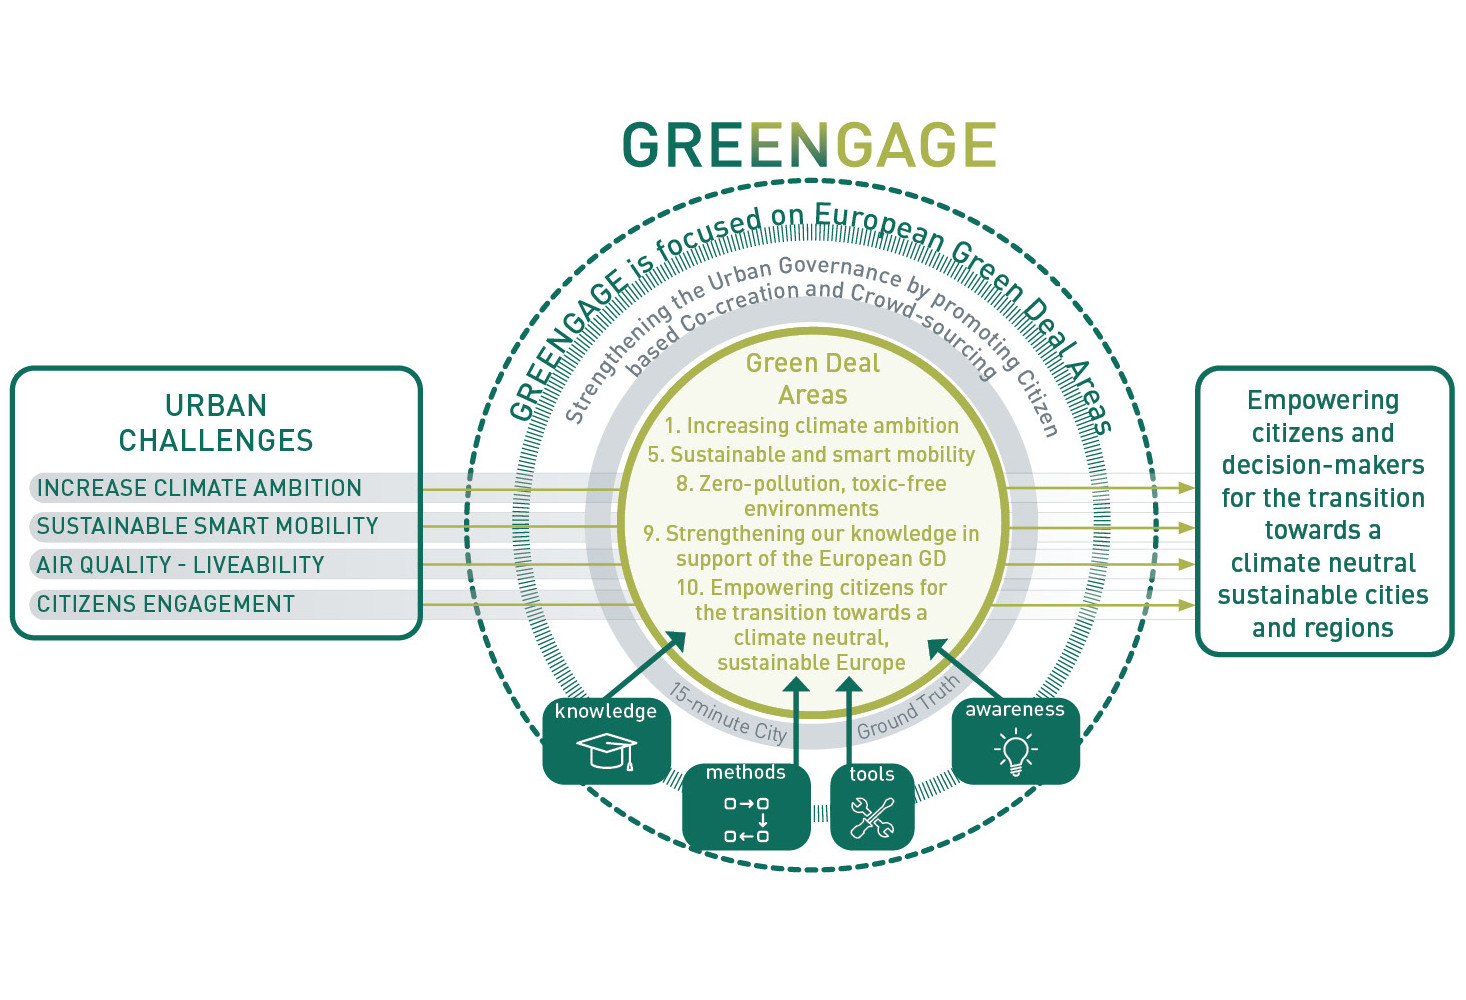 You can see a diagram showing the contents of the GREENGAGE project in English.